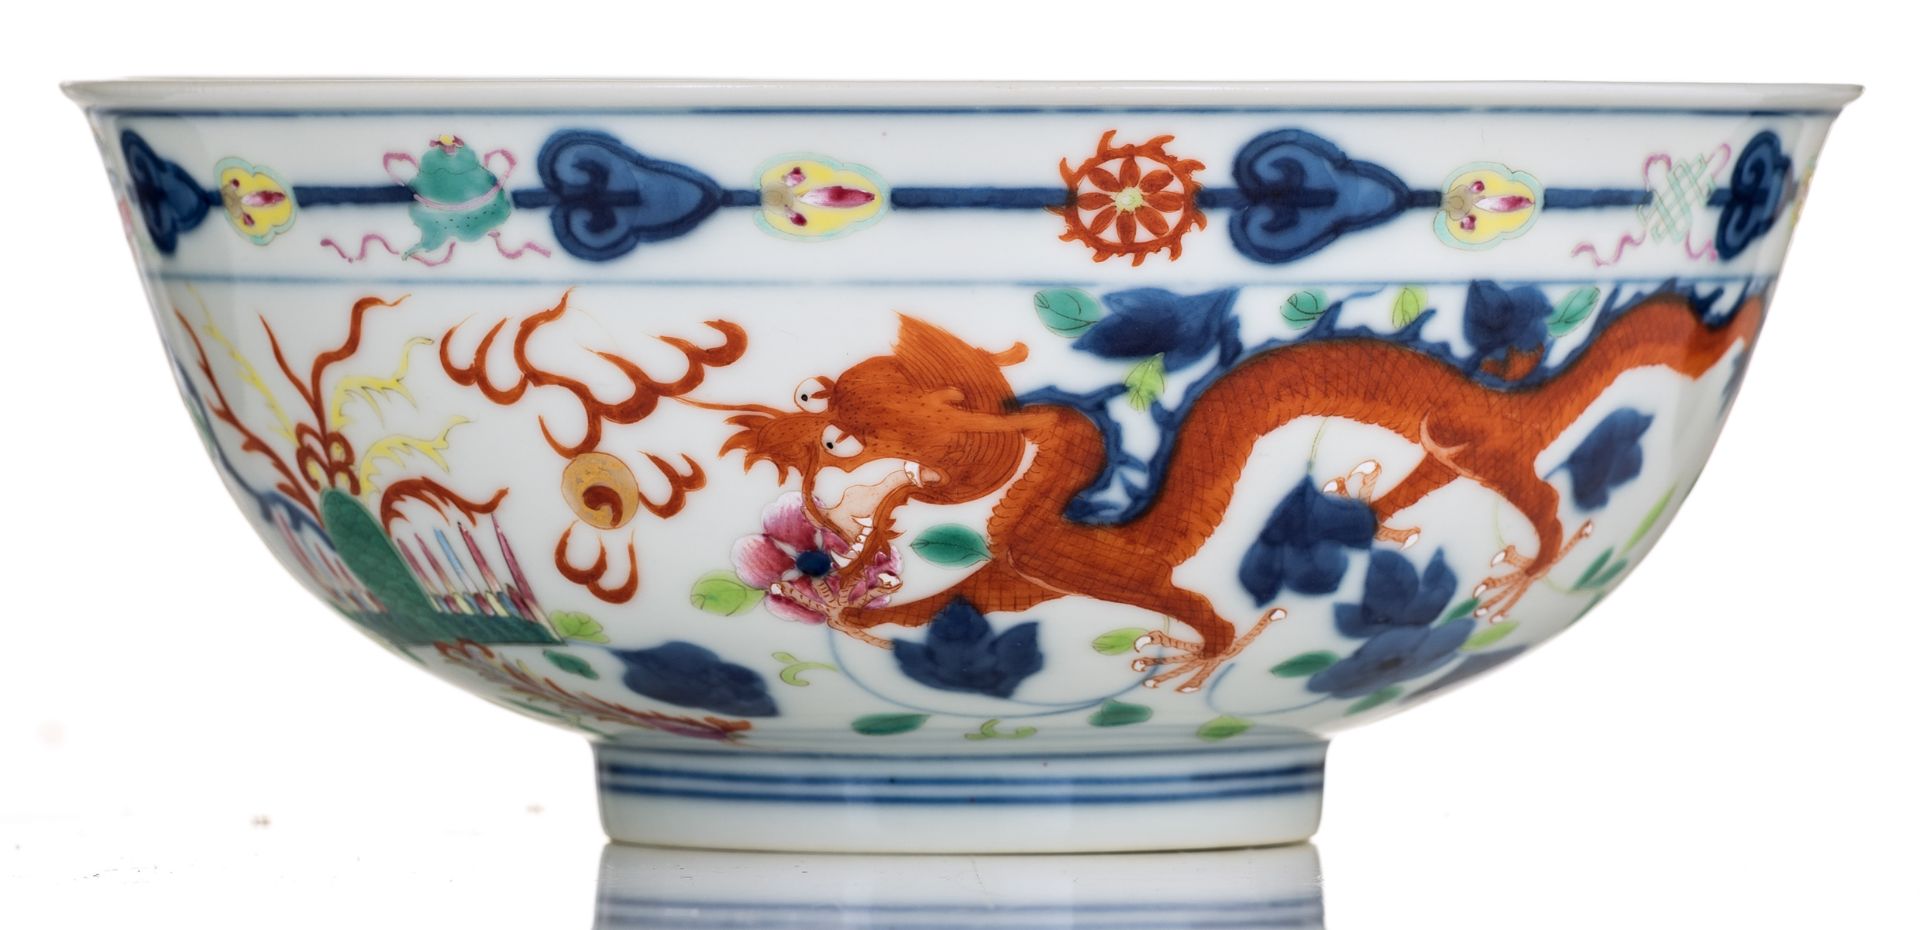 A Chinese polychrome bowl, decorated with flowers and dragons, chasing the flaming pearl, with a Ton - Bild 3 aus 7